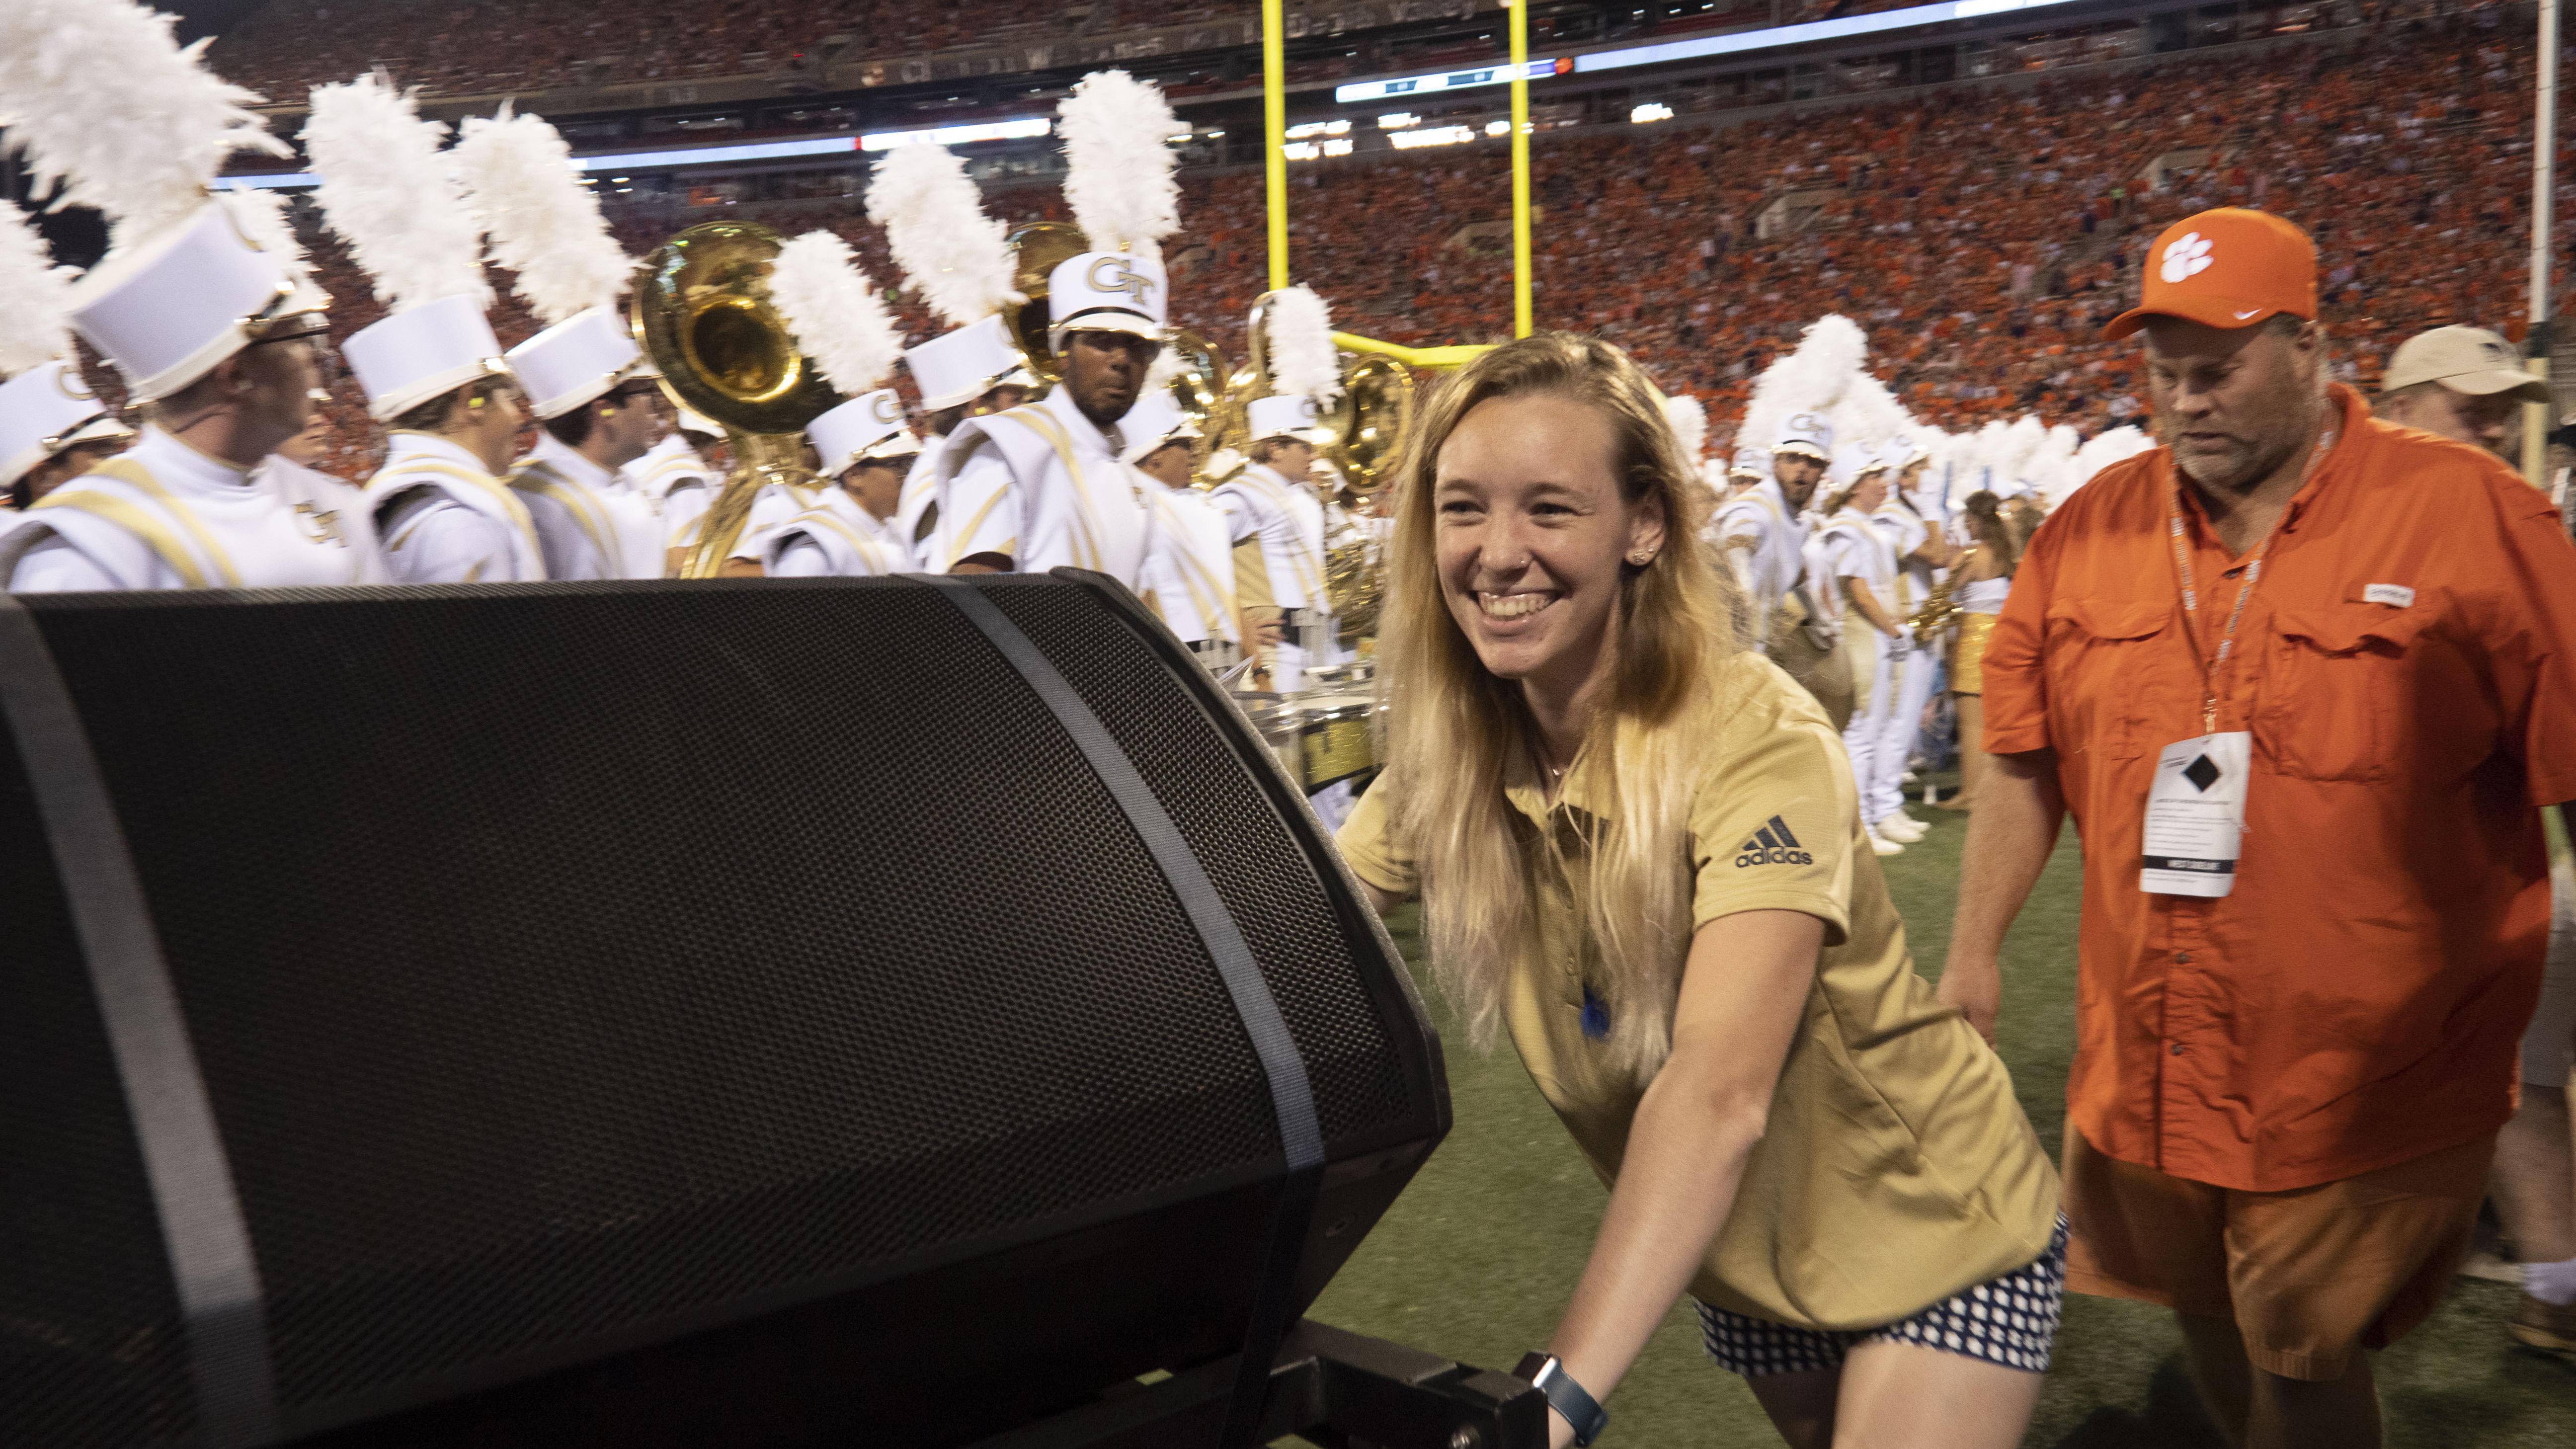 A staff assistant pushes a speaker off the field while the band sets up.